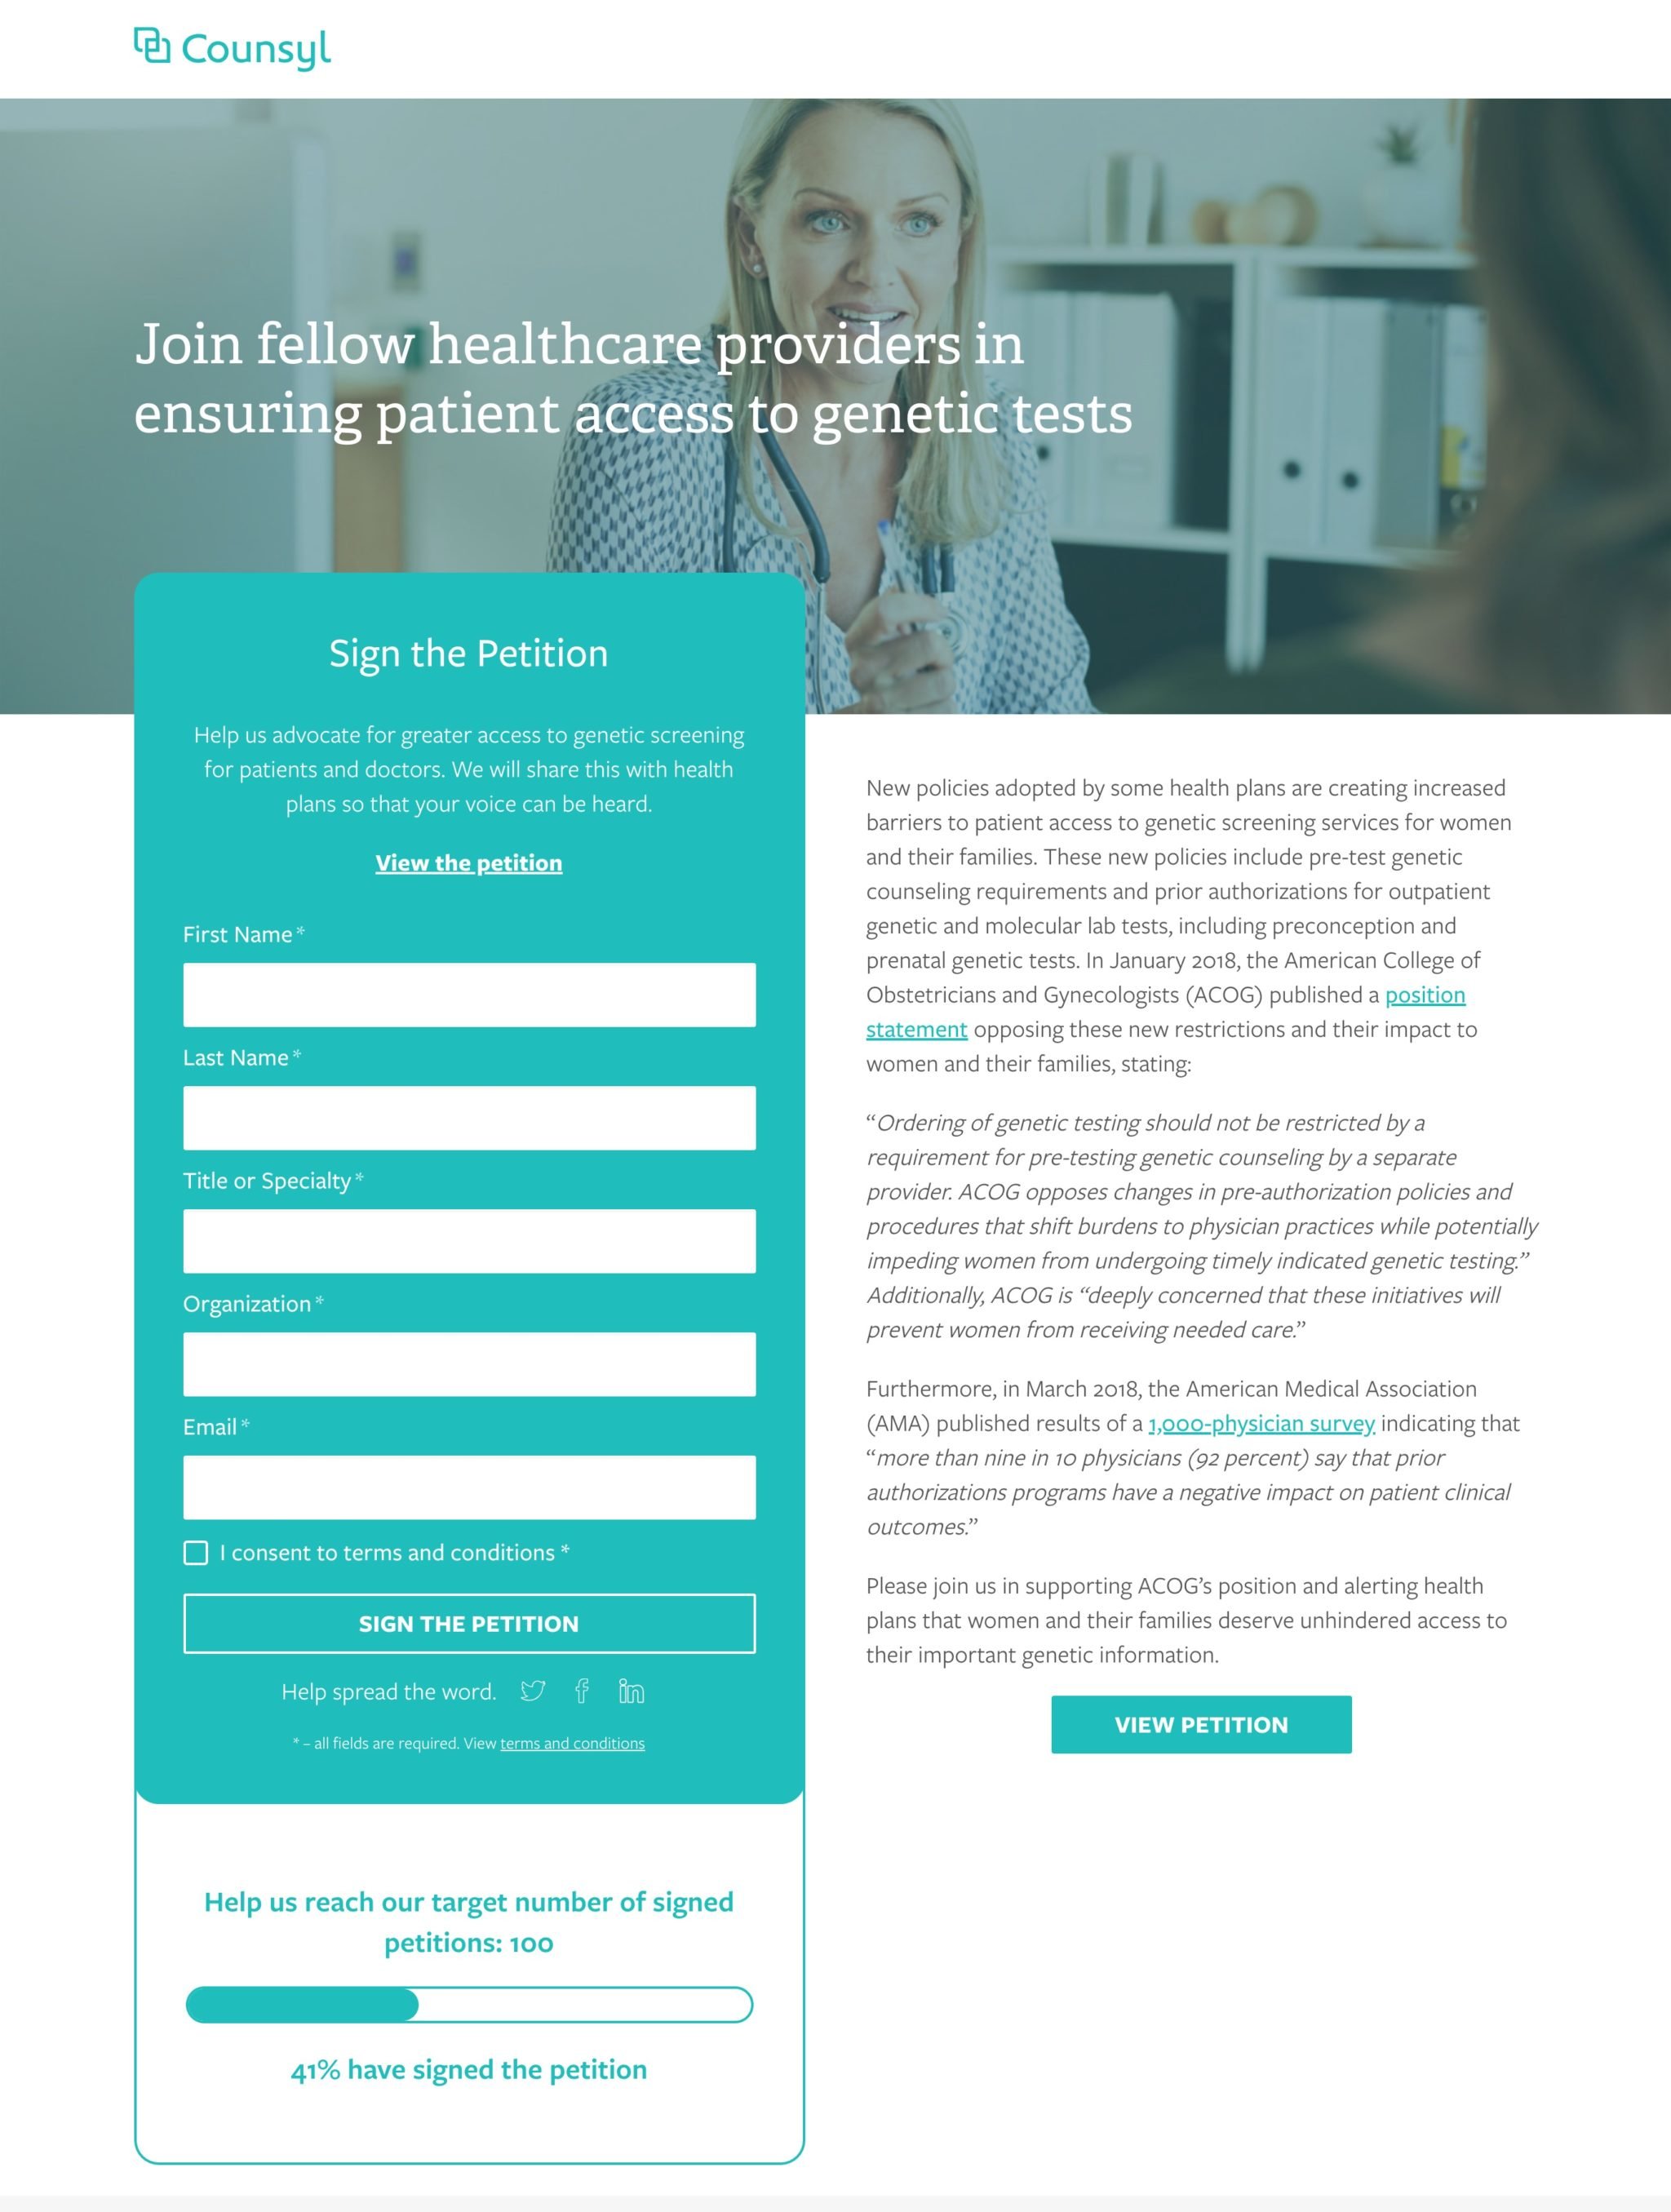 A page from Myriad Women’s Health website showing a form to join the fellow healthcare providers